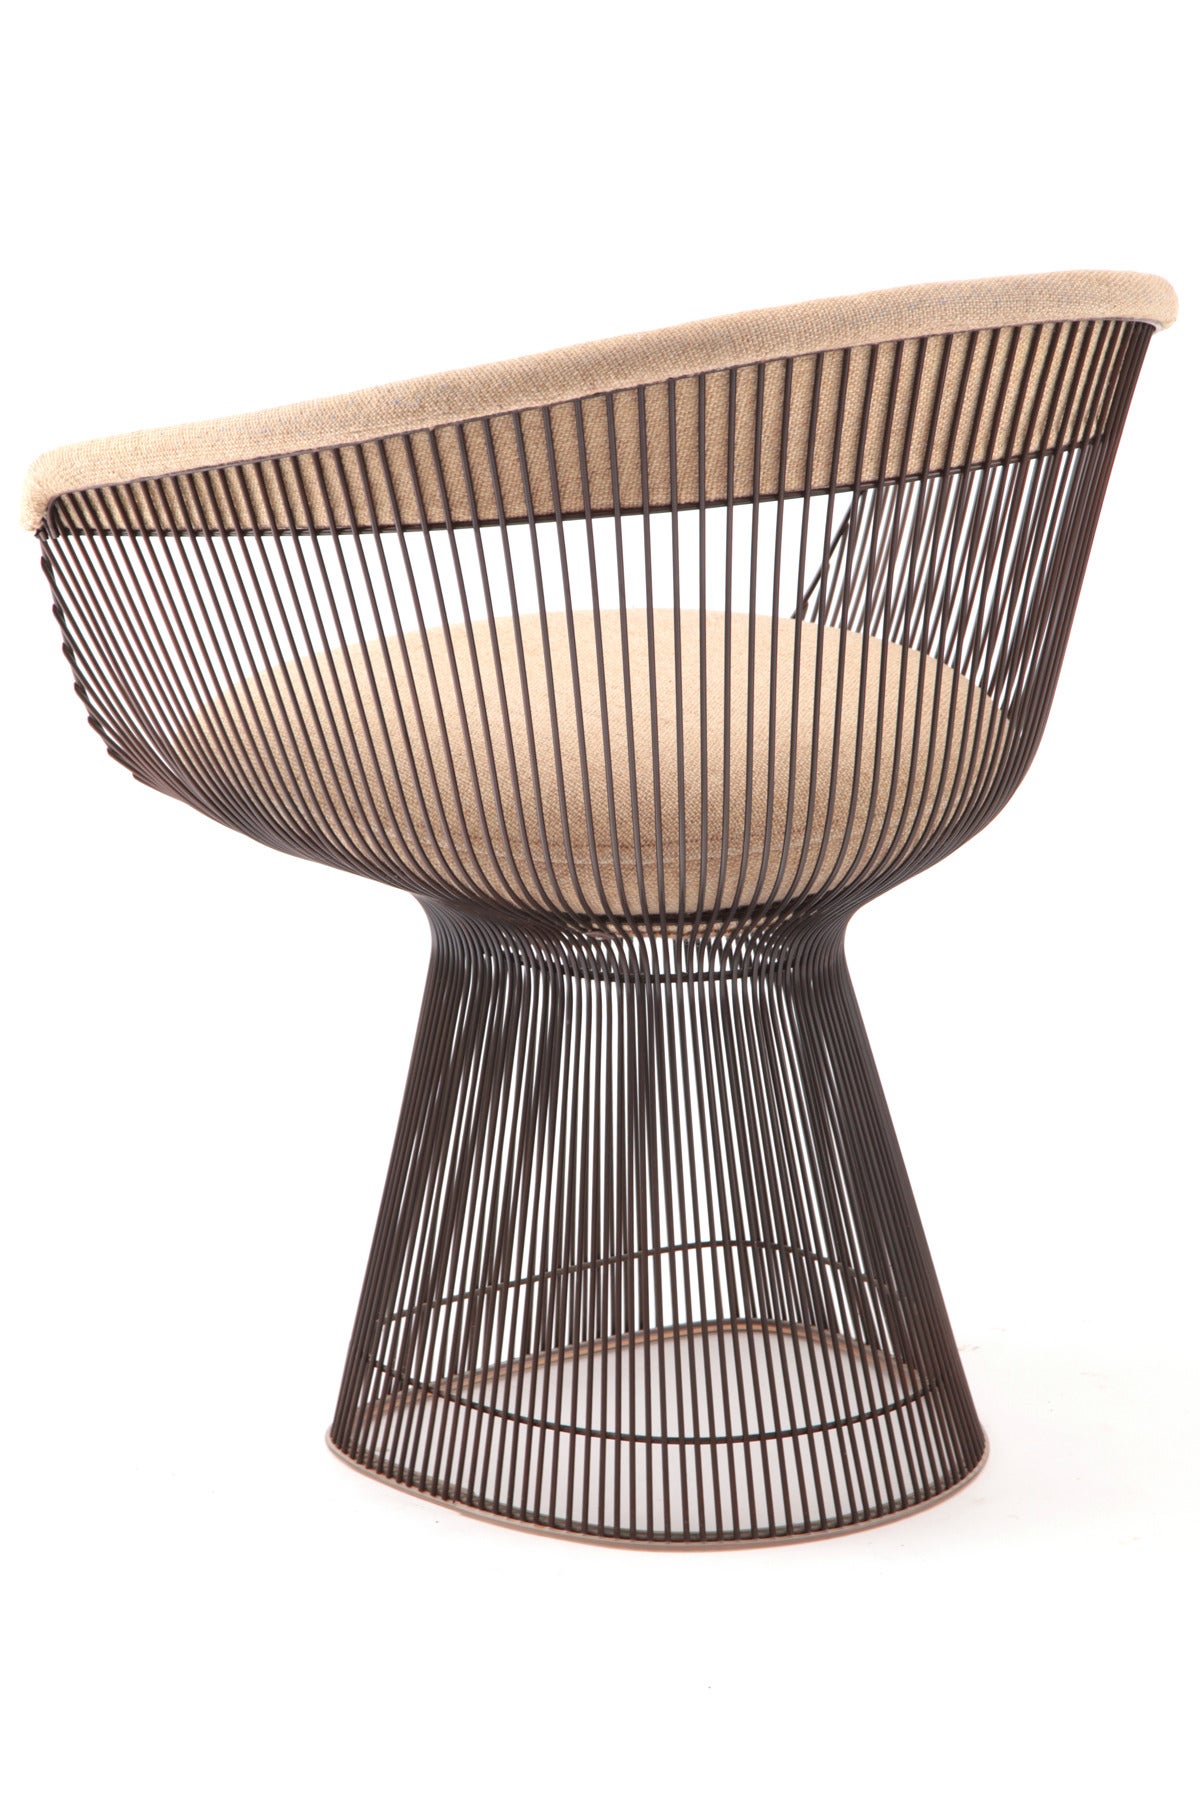 Warren Platner Knoll Bronze Dining Table and Chairs 1